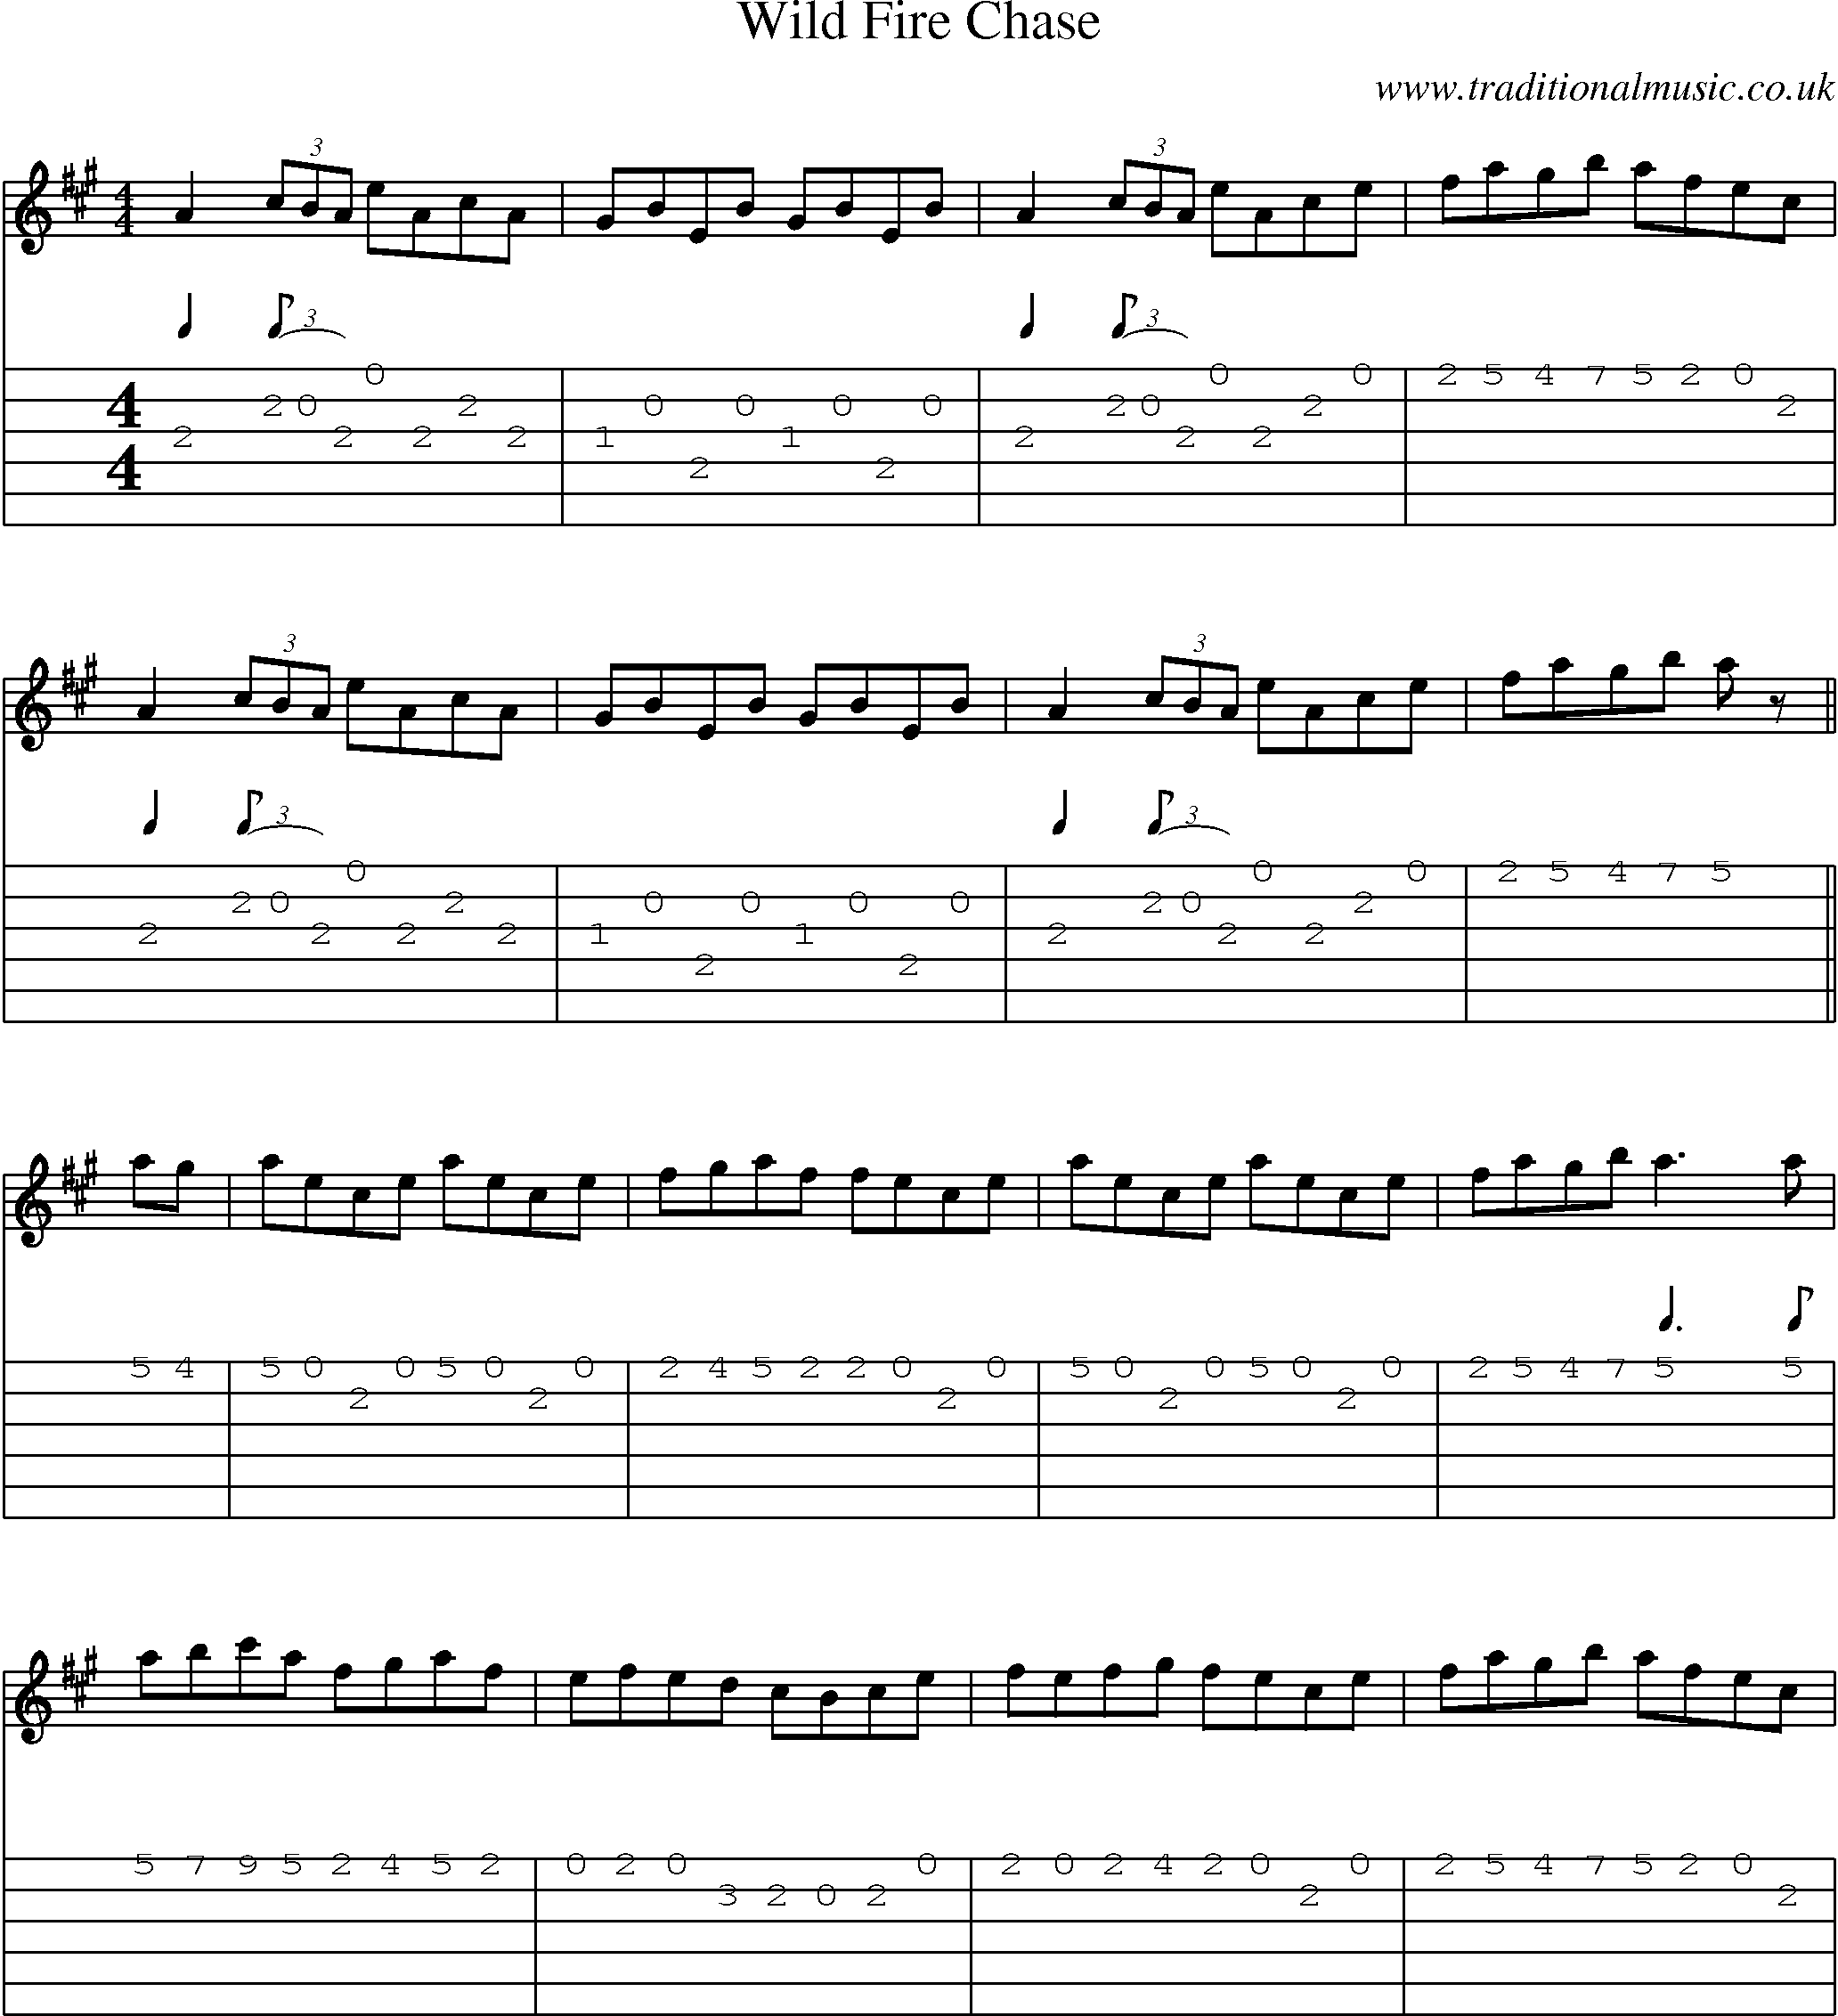 Music Score and Guitar Tabs for Wild Fire Chase